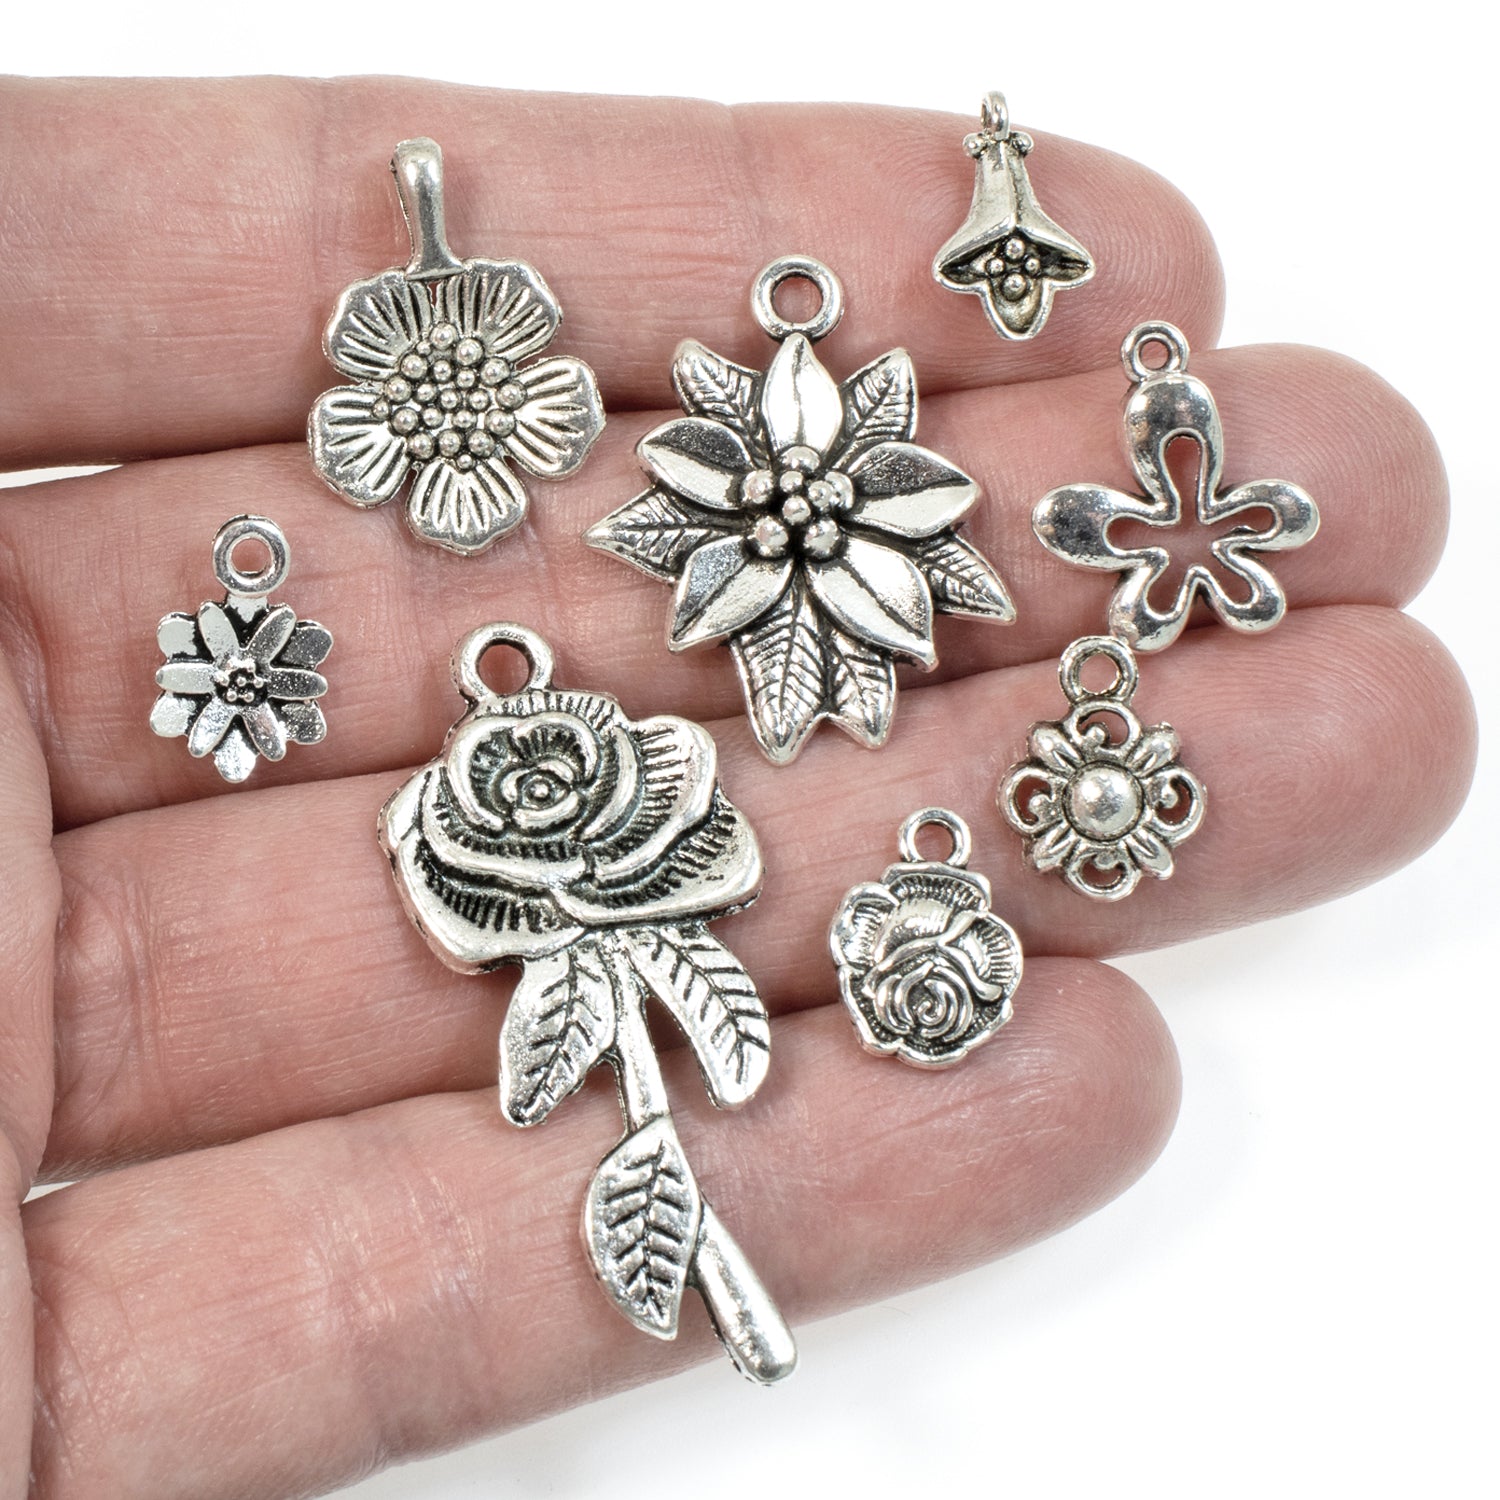 120 Pieces Charms for Jewelry Making Birthstone Charms Earring Charms  Flower Charms Silver Charms Bling Charms